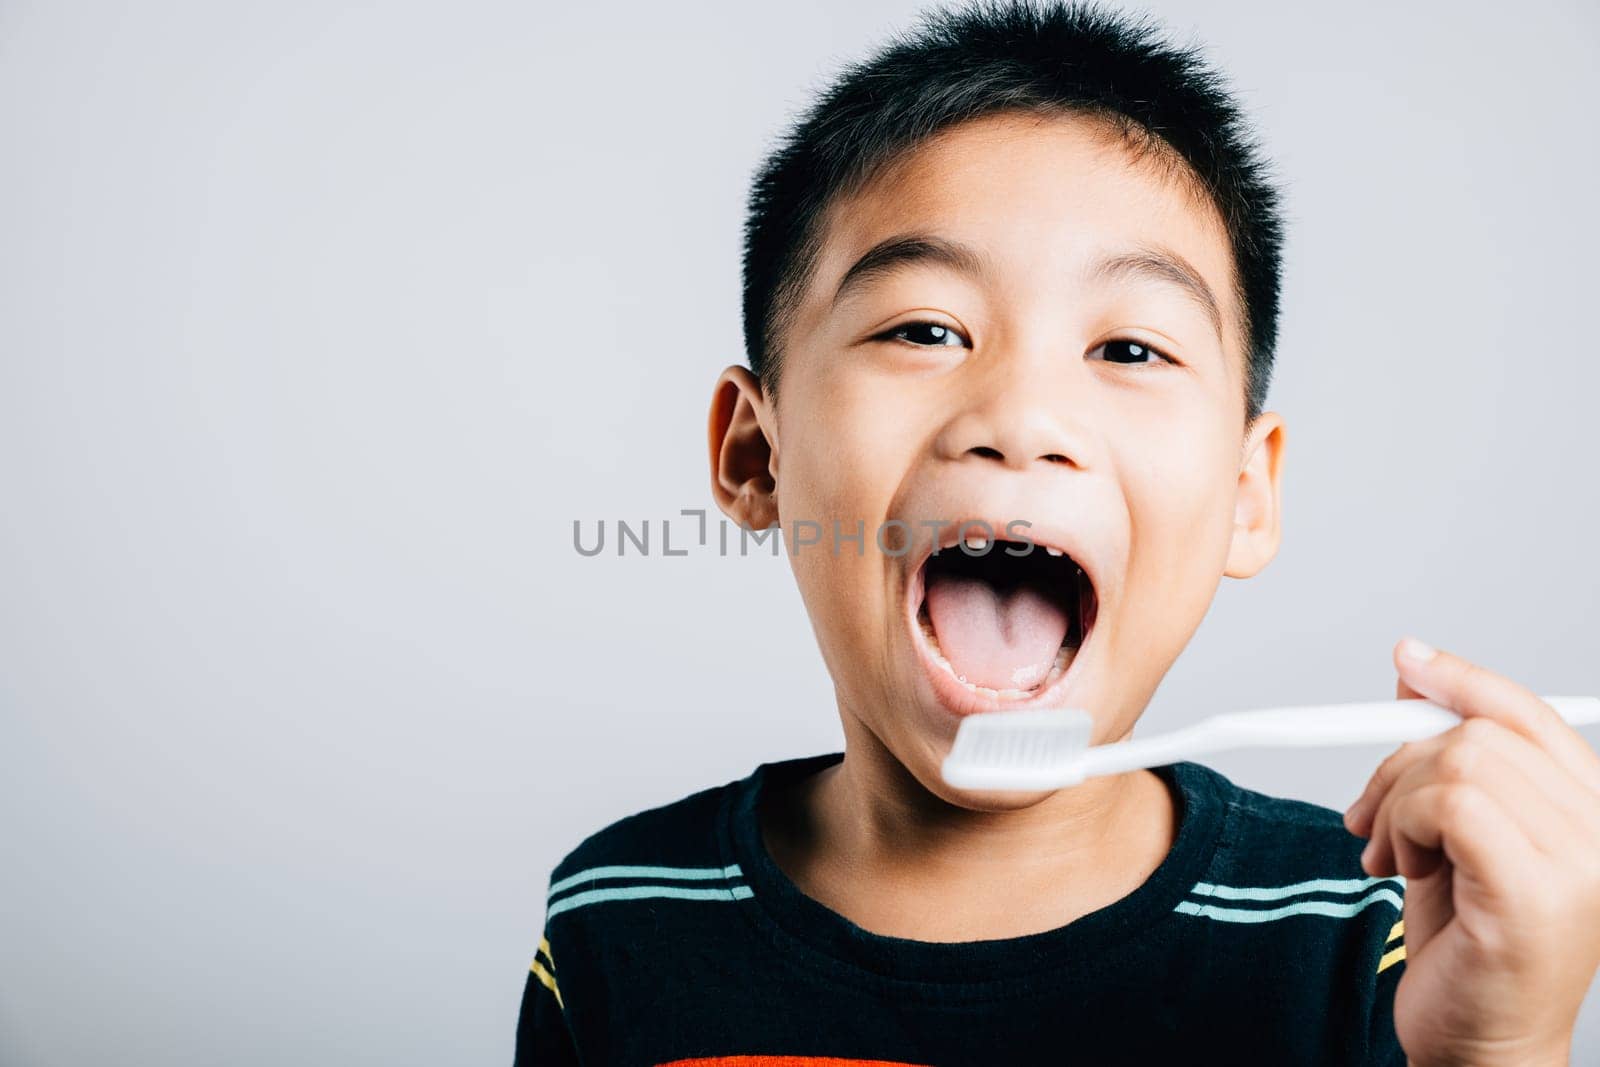 Isolated on a white background a cute Asian kid smiles holding a toothbrush emphasizing dental hygiene and the joy of learning without an upper milk tooth. Children dentist routine by Sorapop